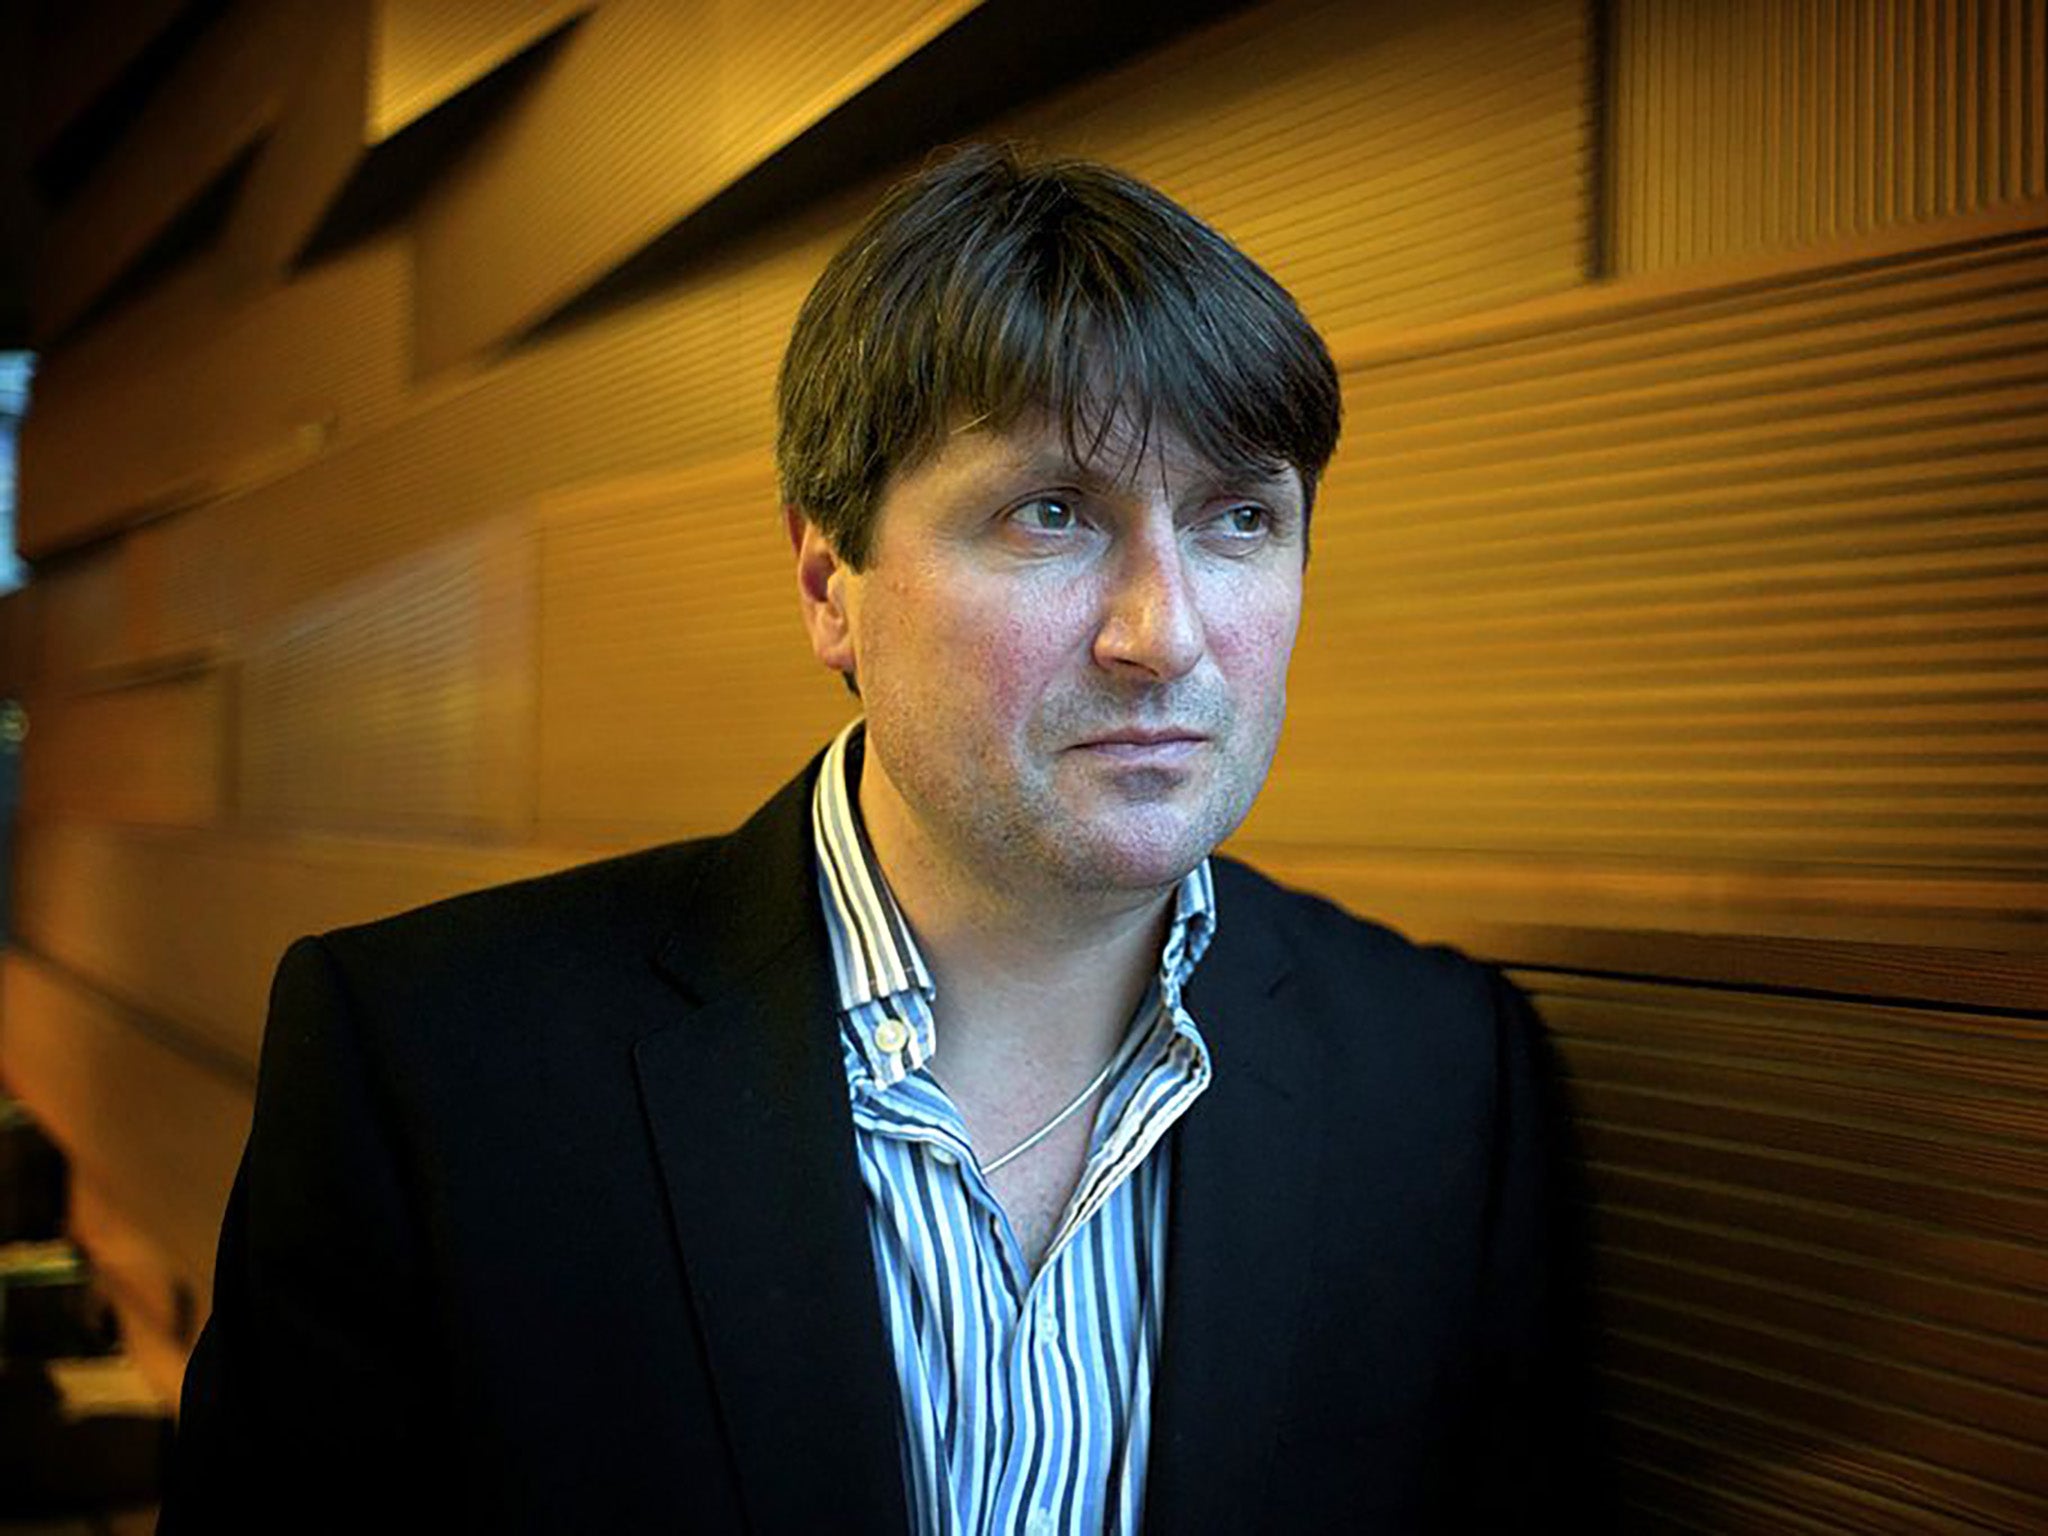 Poet laureate Simon Armitage, who has written a poem for the pandemic